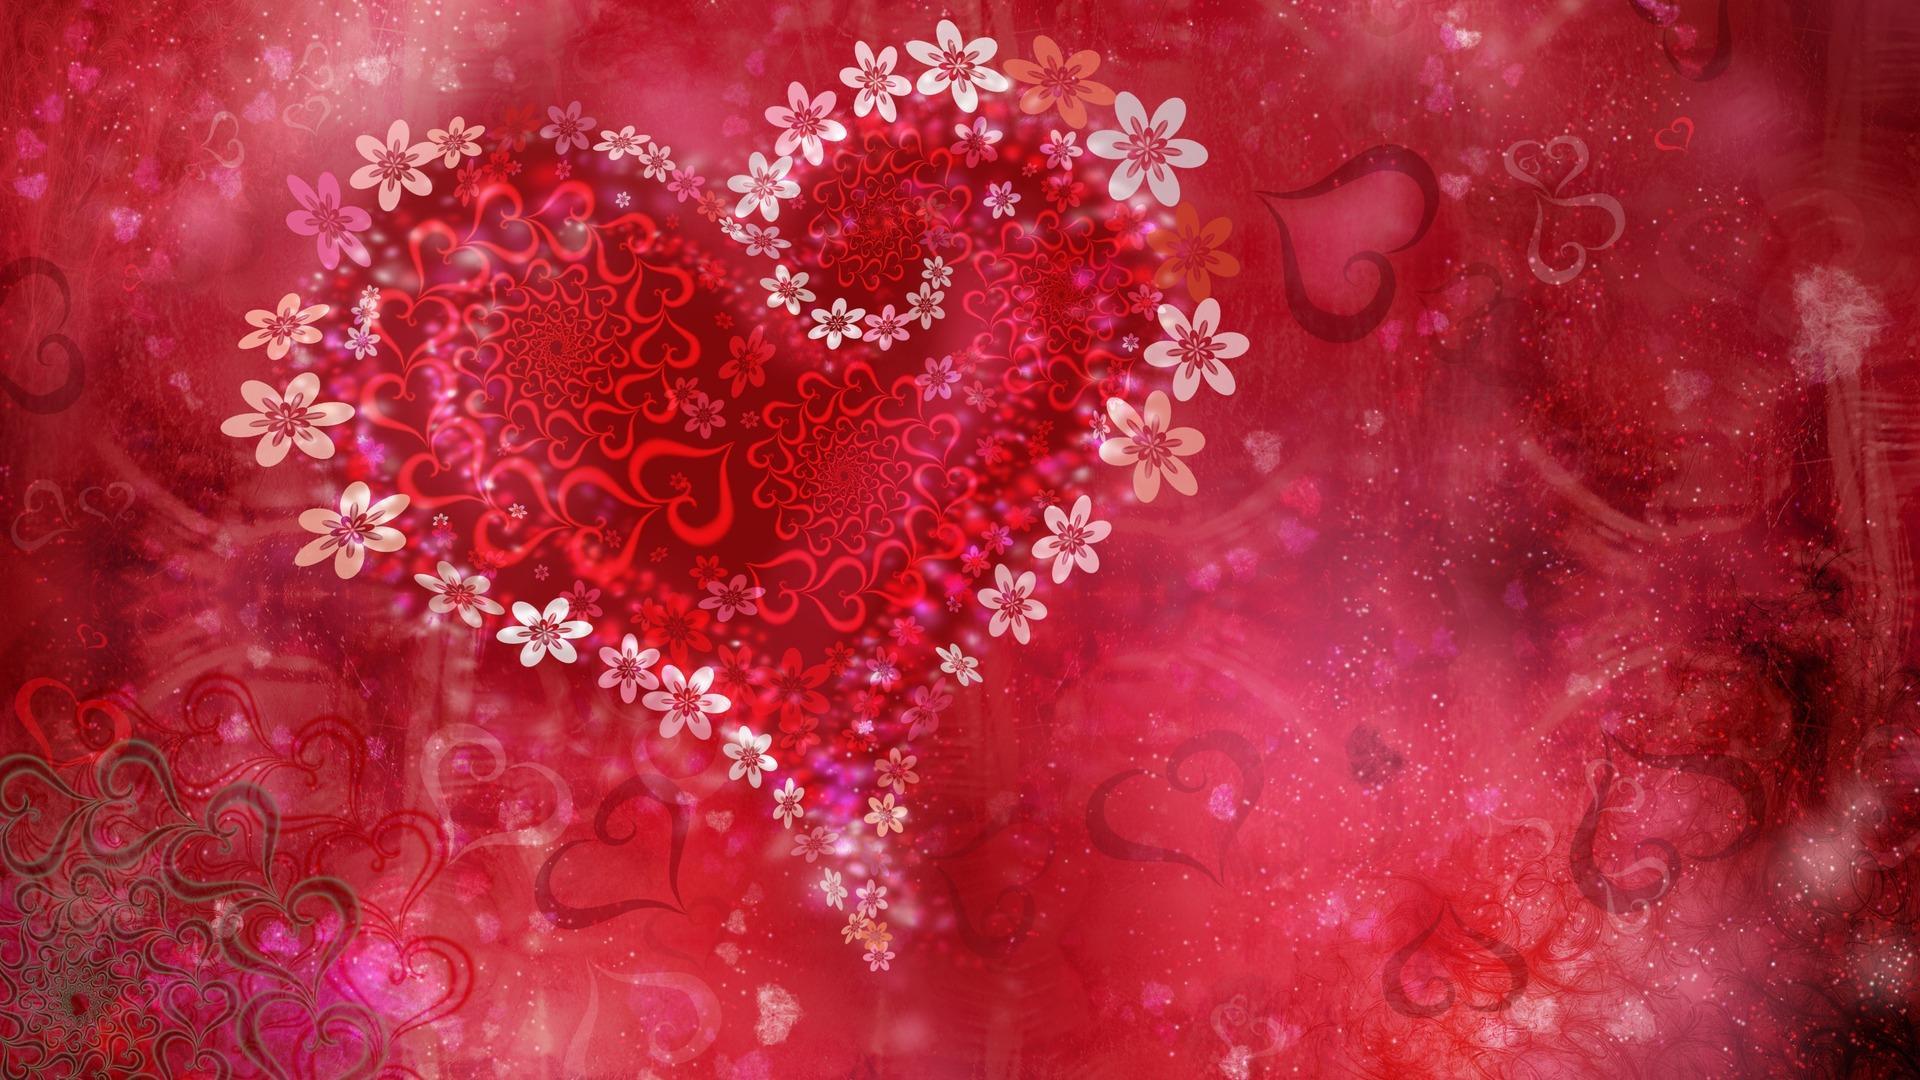 Love Heart Image, Picture, Wallpaper Download Free. Happy